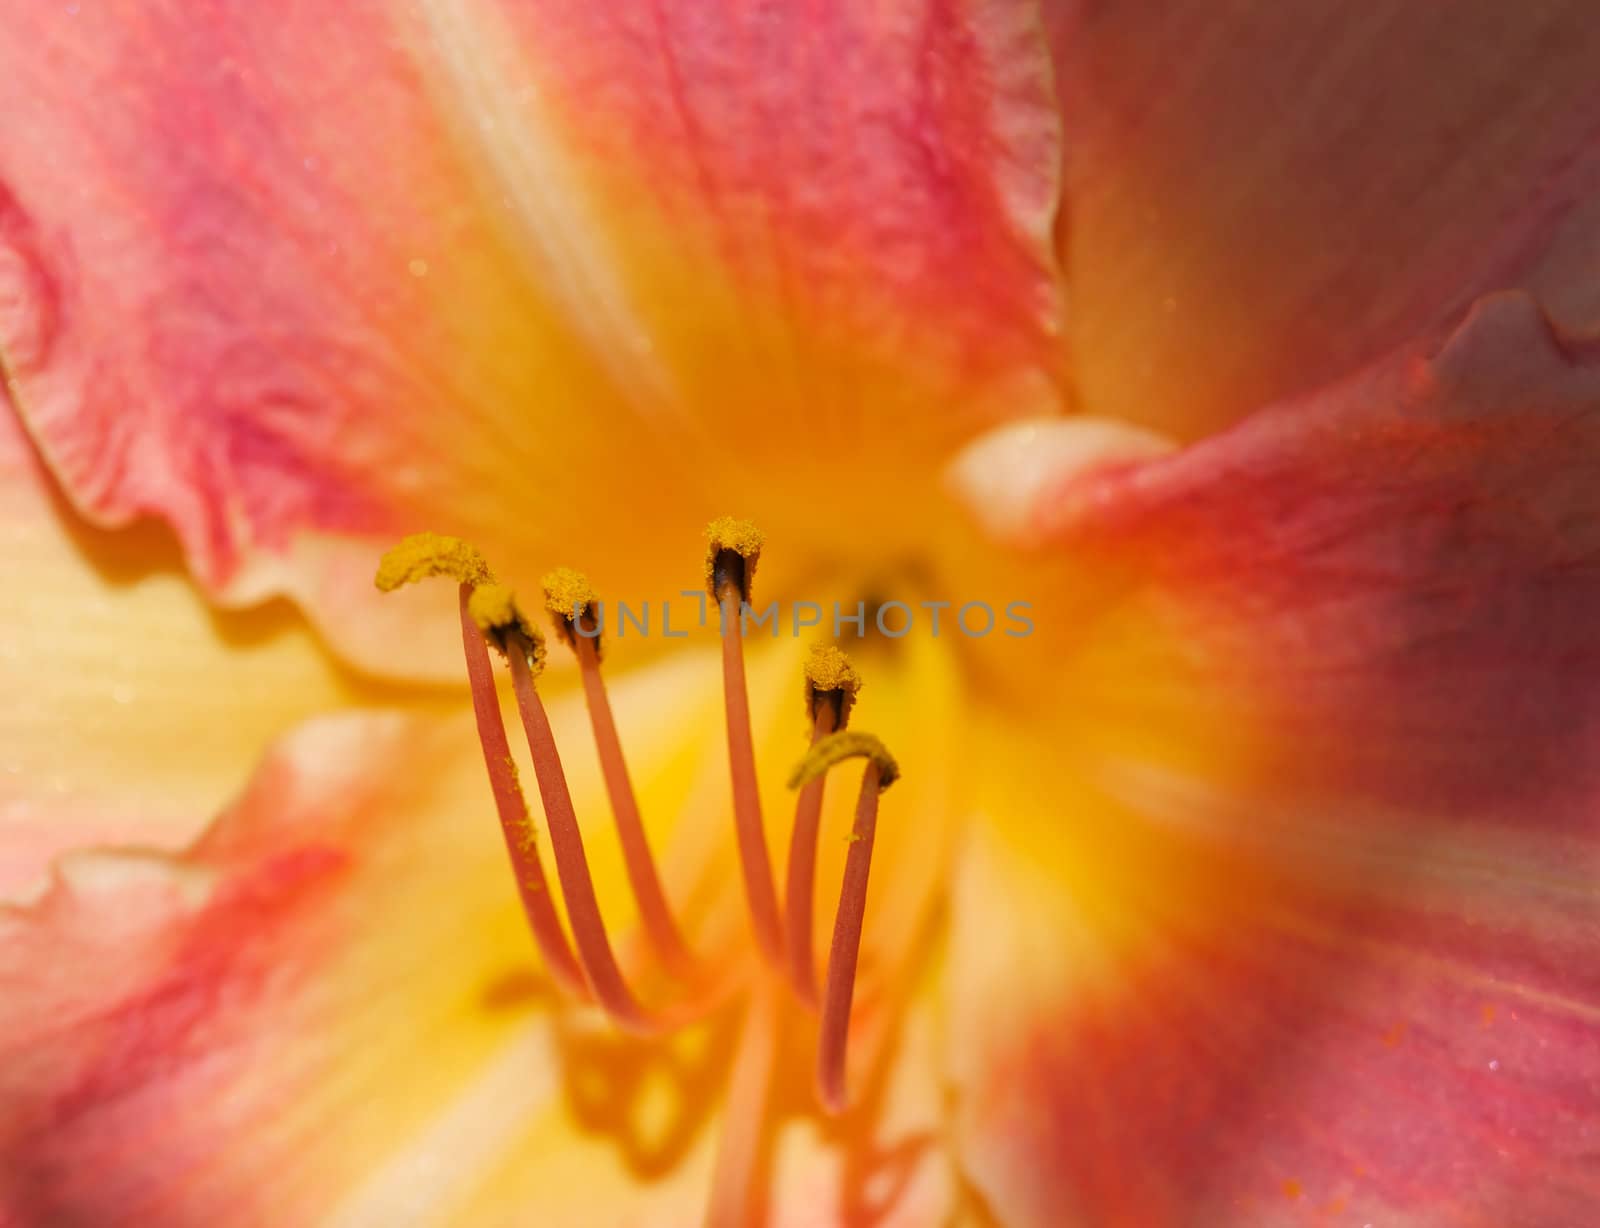 Yellow Orange, Red colored Lilly with gold pollenated stamens